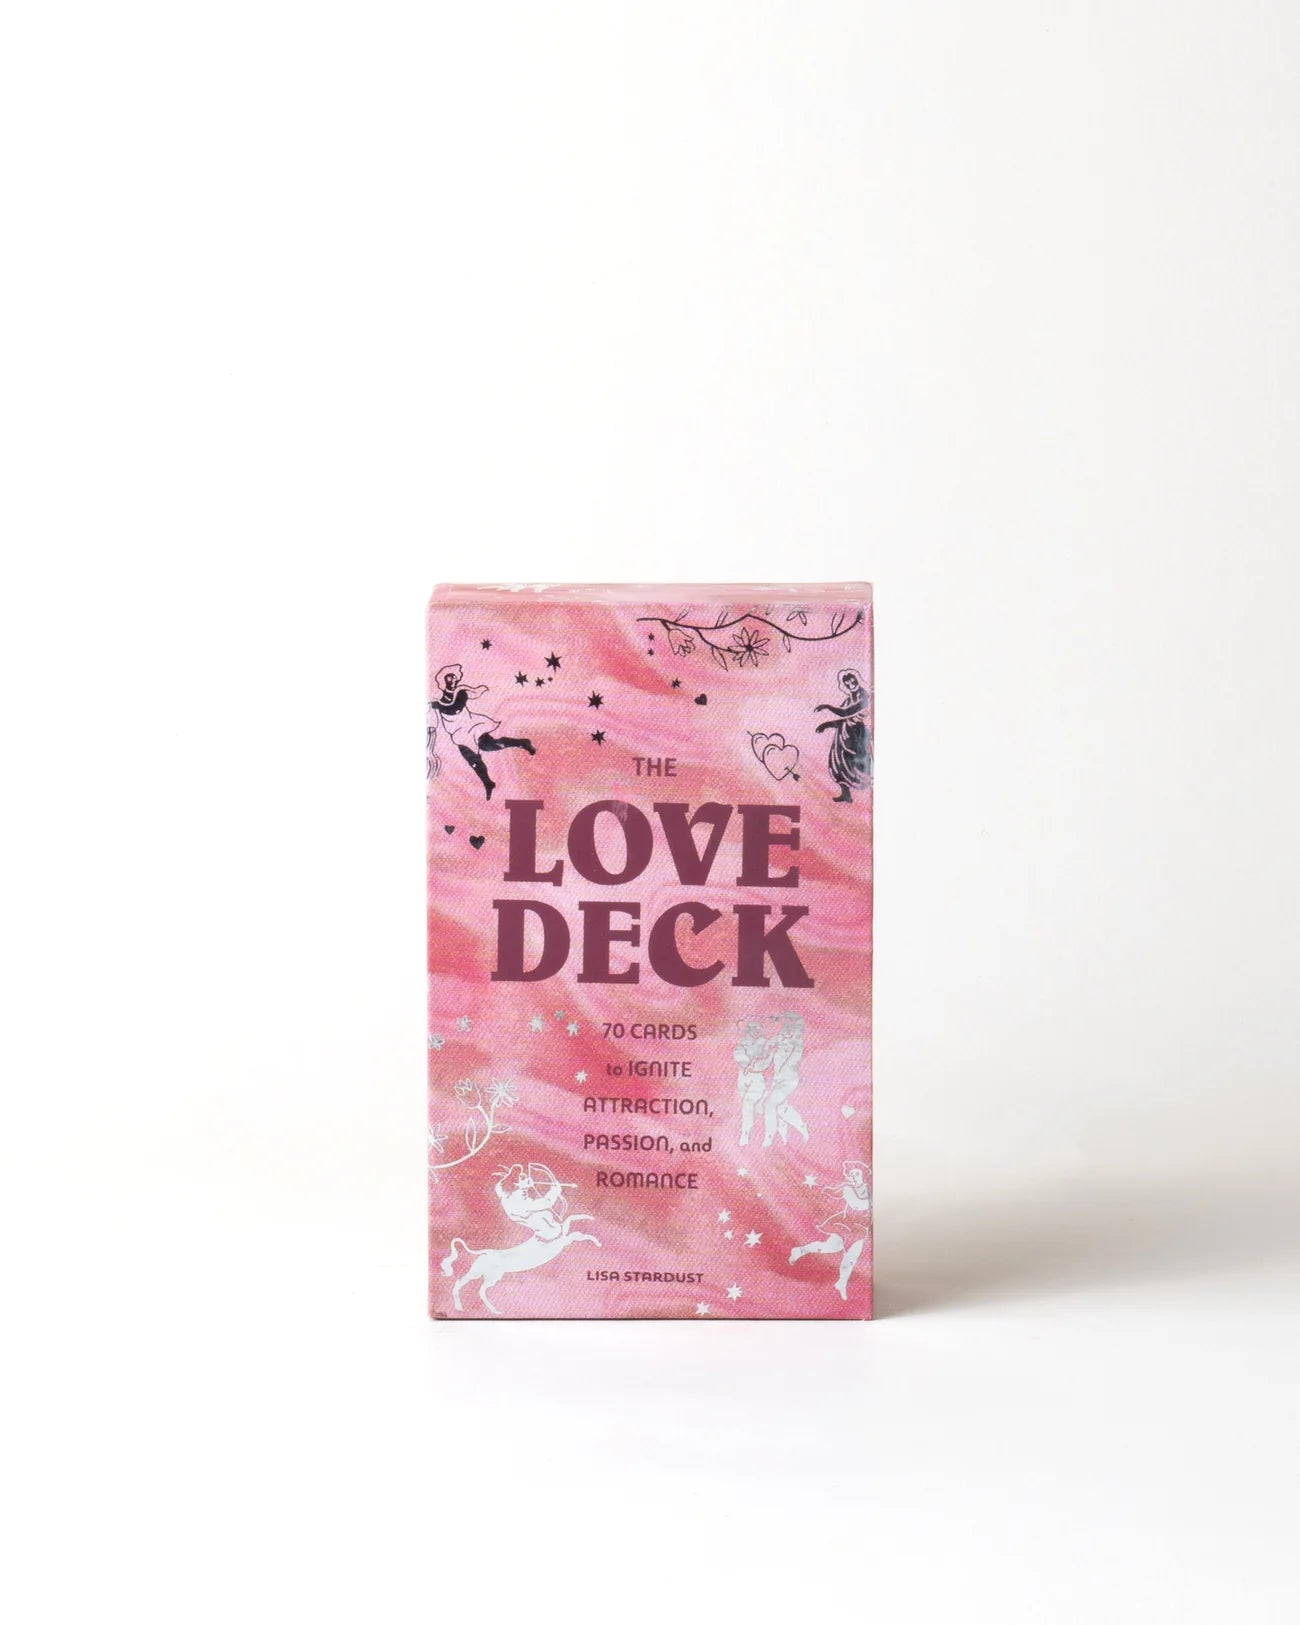 The Love Deck: 70 Cards to Ignite Attraction, Passion, and Romance